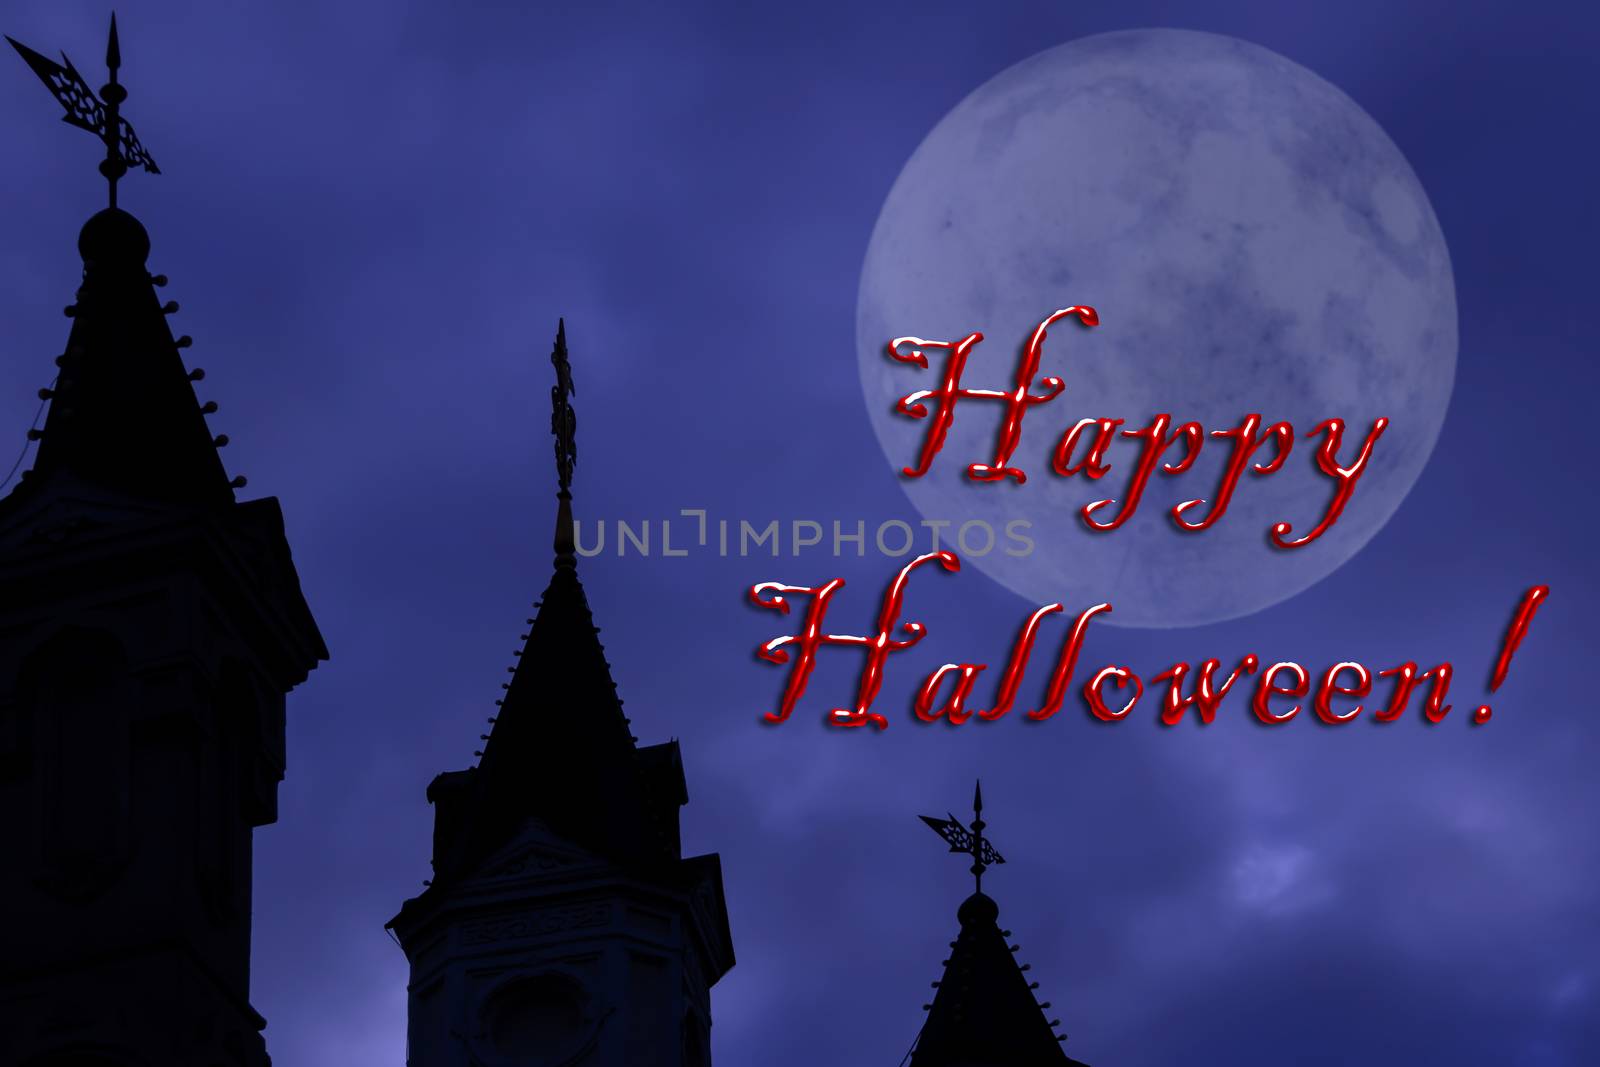 Halloween greeting, text on the background of the silhouette of a Gothic castle tower, cloudy night sky and full moon. Greeting card, poster or banner.